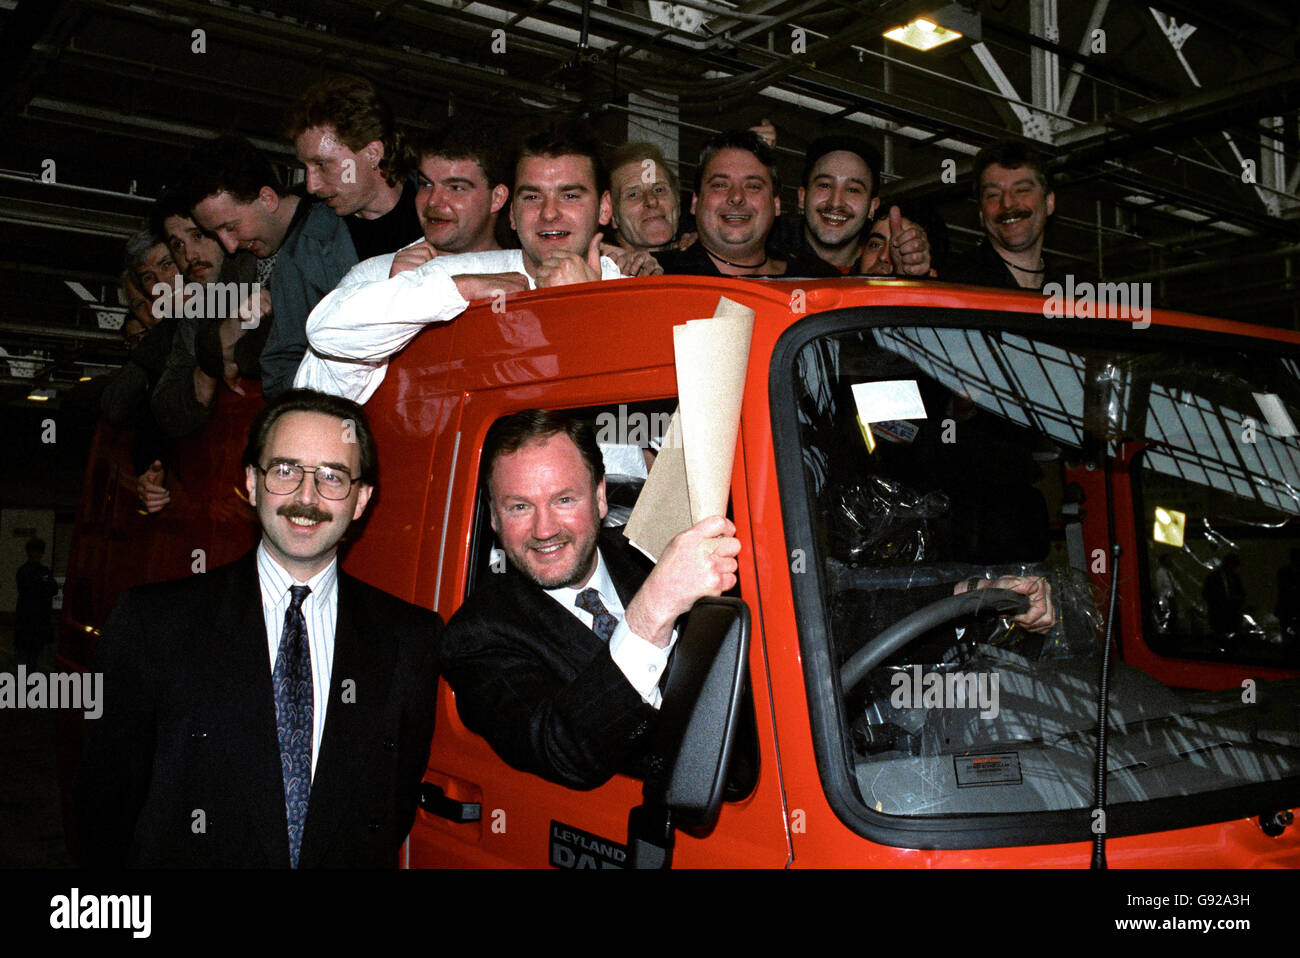 Allan Amey, the managing director & Chief Executive of Leyland-Daf vans with David Duggins (L) of the receivers with some jubilant work force. Stock Photo